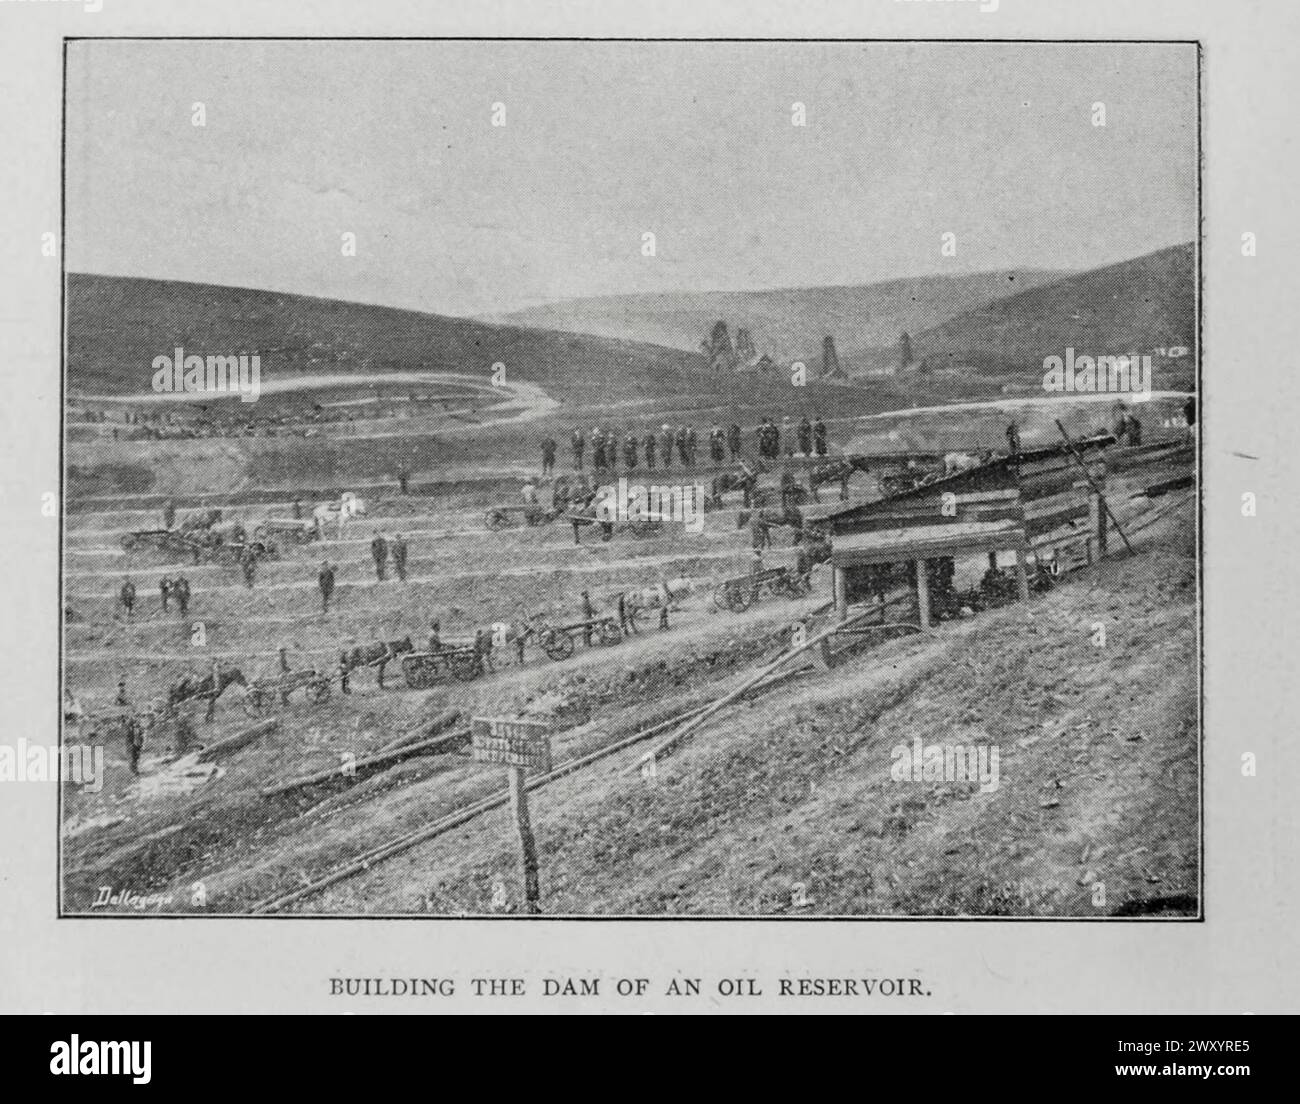 BUILDING THE DAM OF AN OIL RESERVOIR from the Article THE BAKU PETROLEUM DISTRICT OF RUSSIA. By David A. Louis. from The Engineering Magazine Devoted to Industrial Progress Volume XV 1898 The Engineering Magazine Co Stock Photo